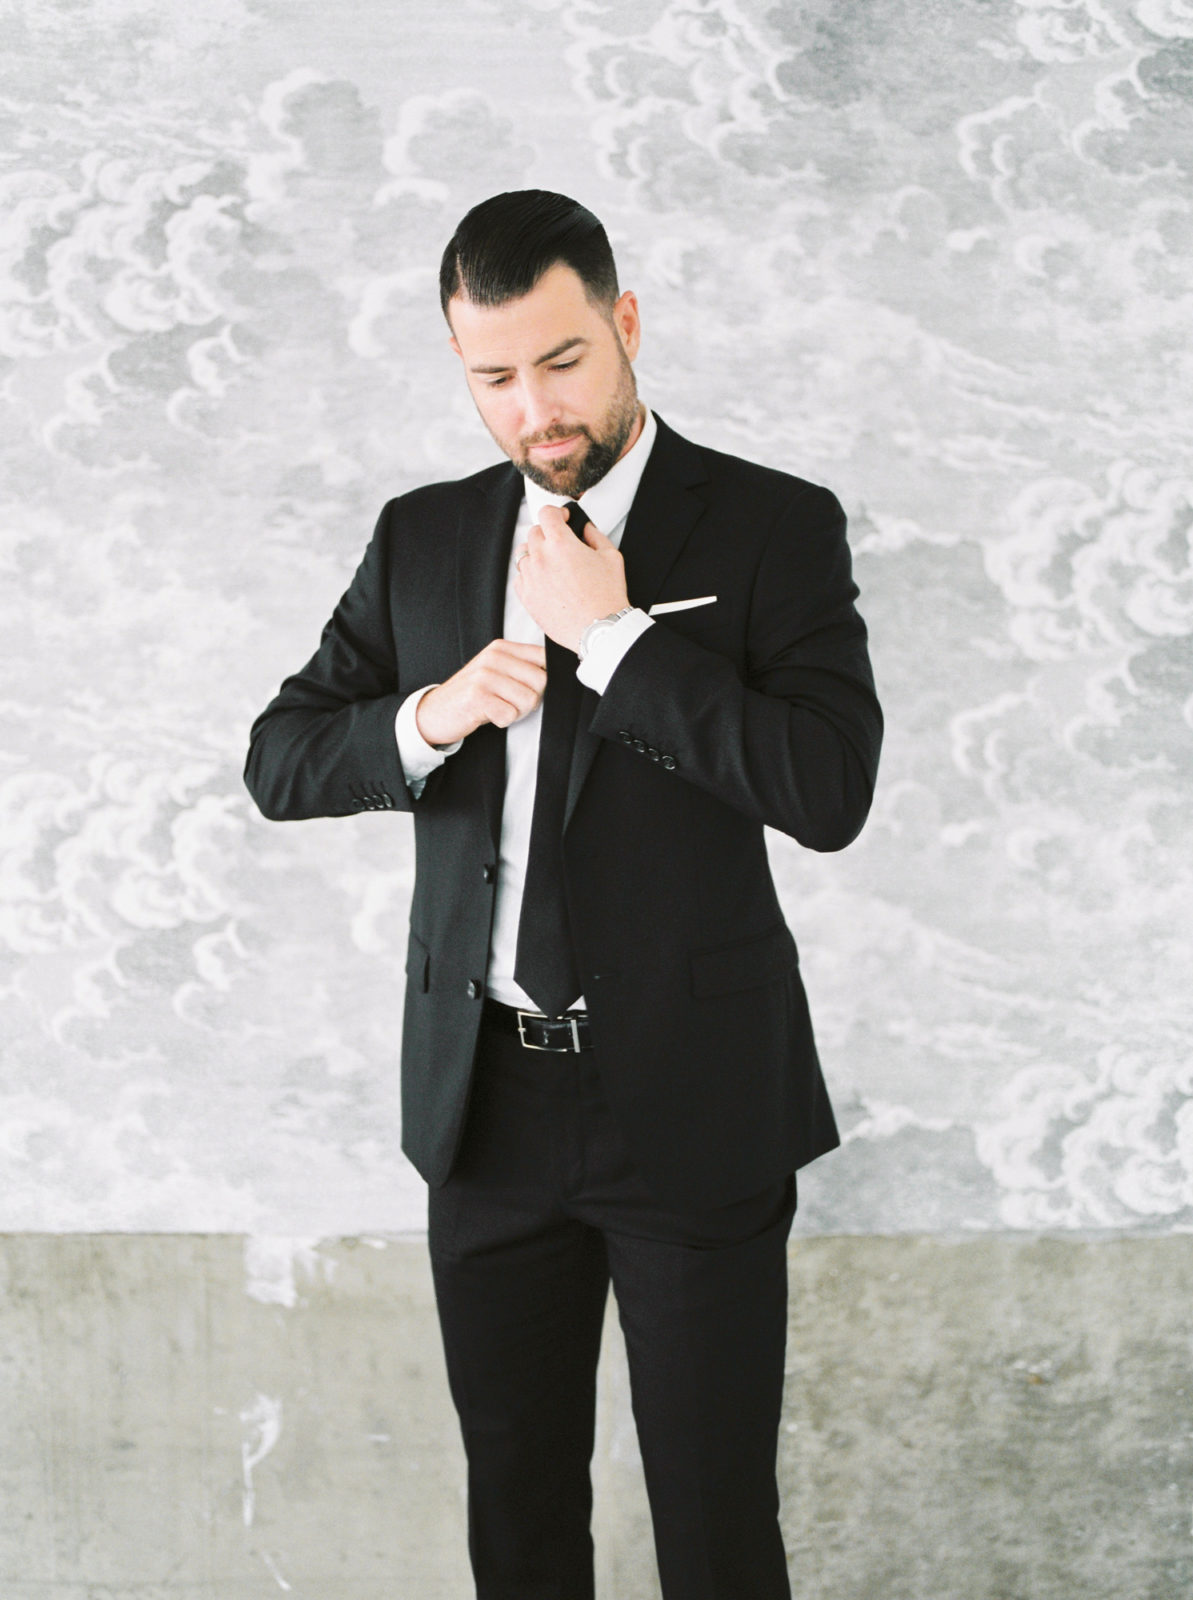 Groom attire inspiration in a classic black suit